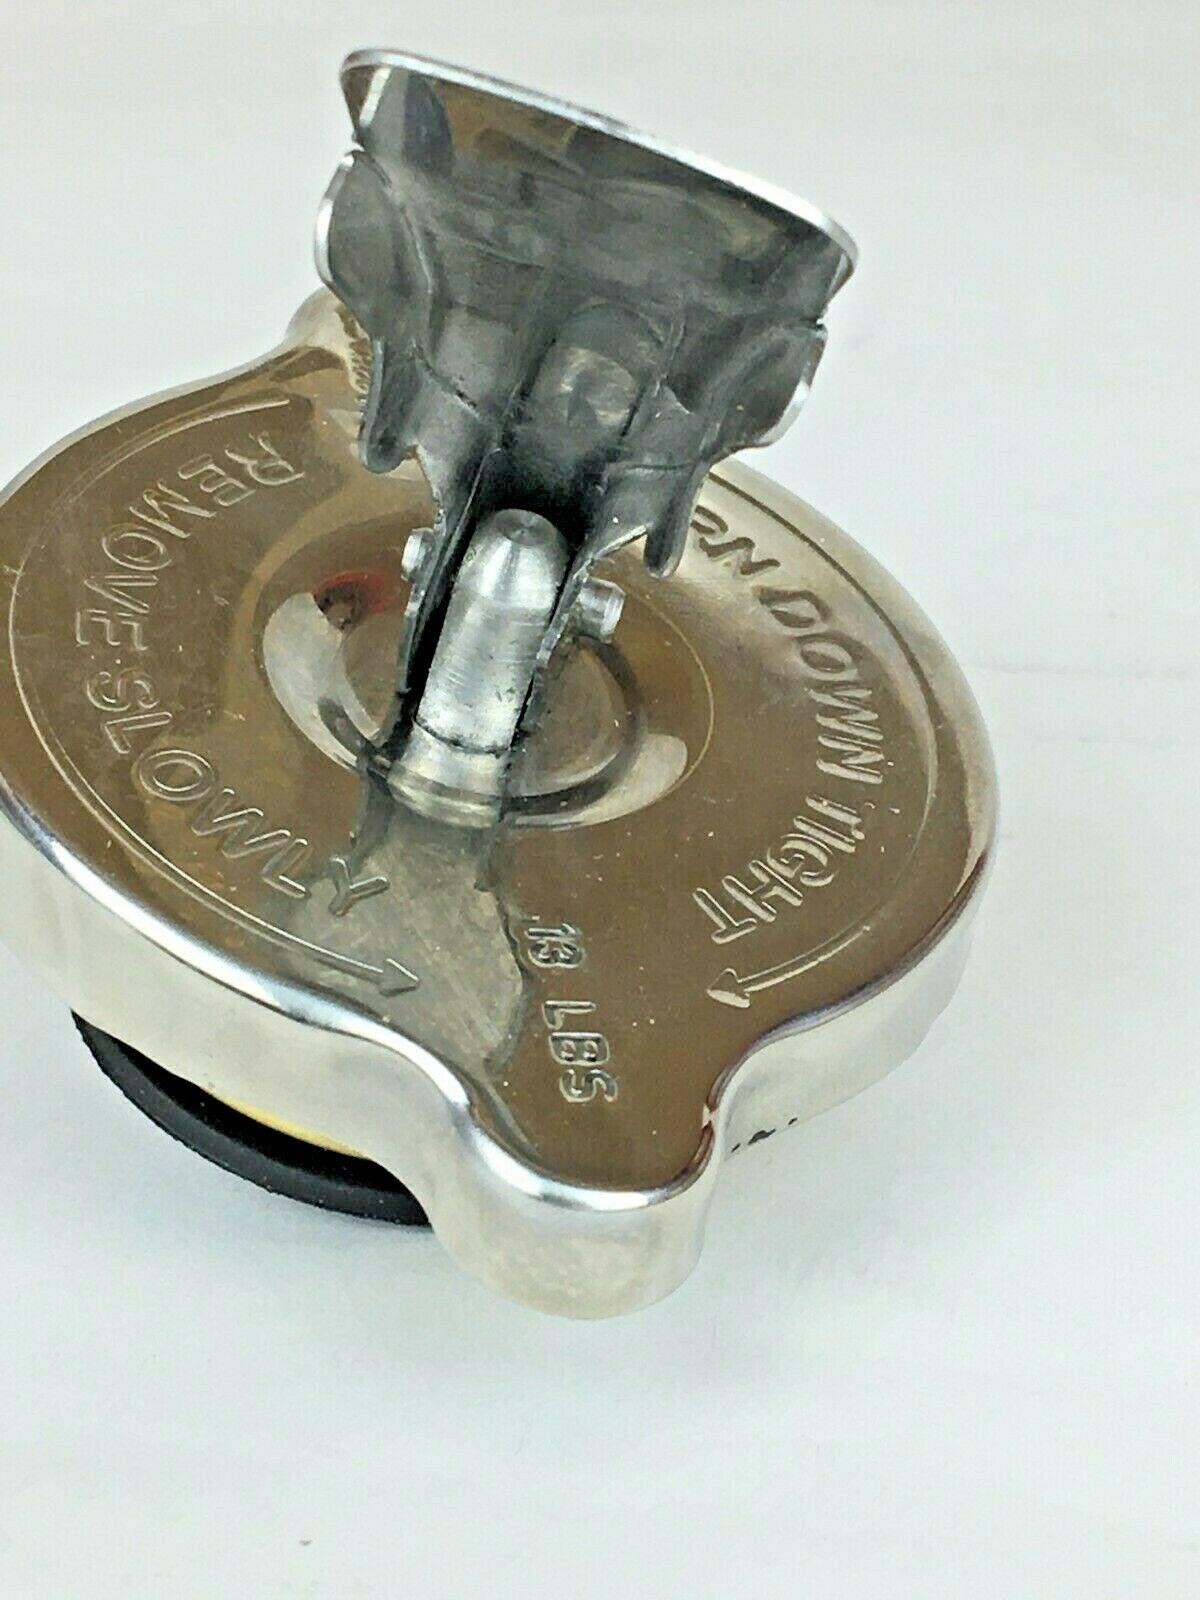 Stainless Steel SAFETY Rad Radiator Cap 13lbs Fits FORD CAPRI 